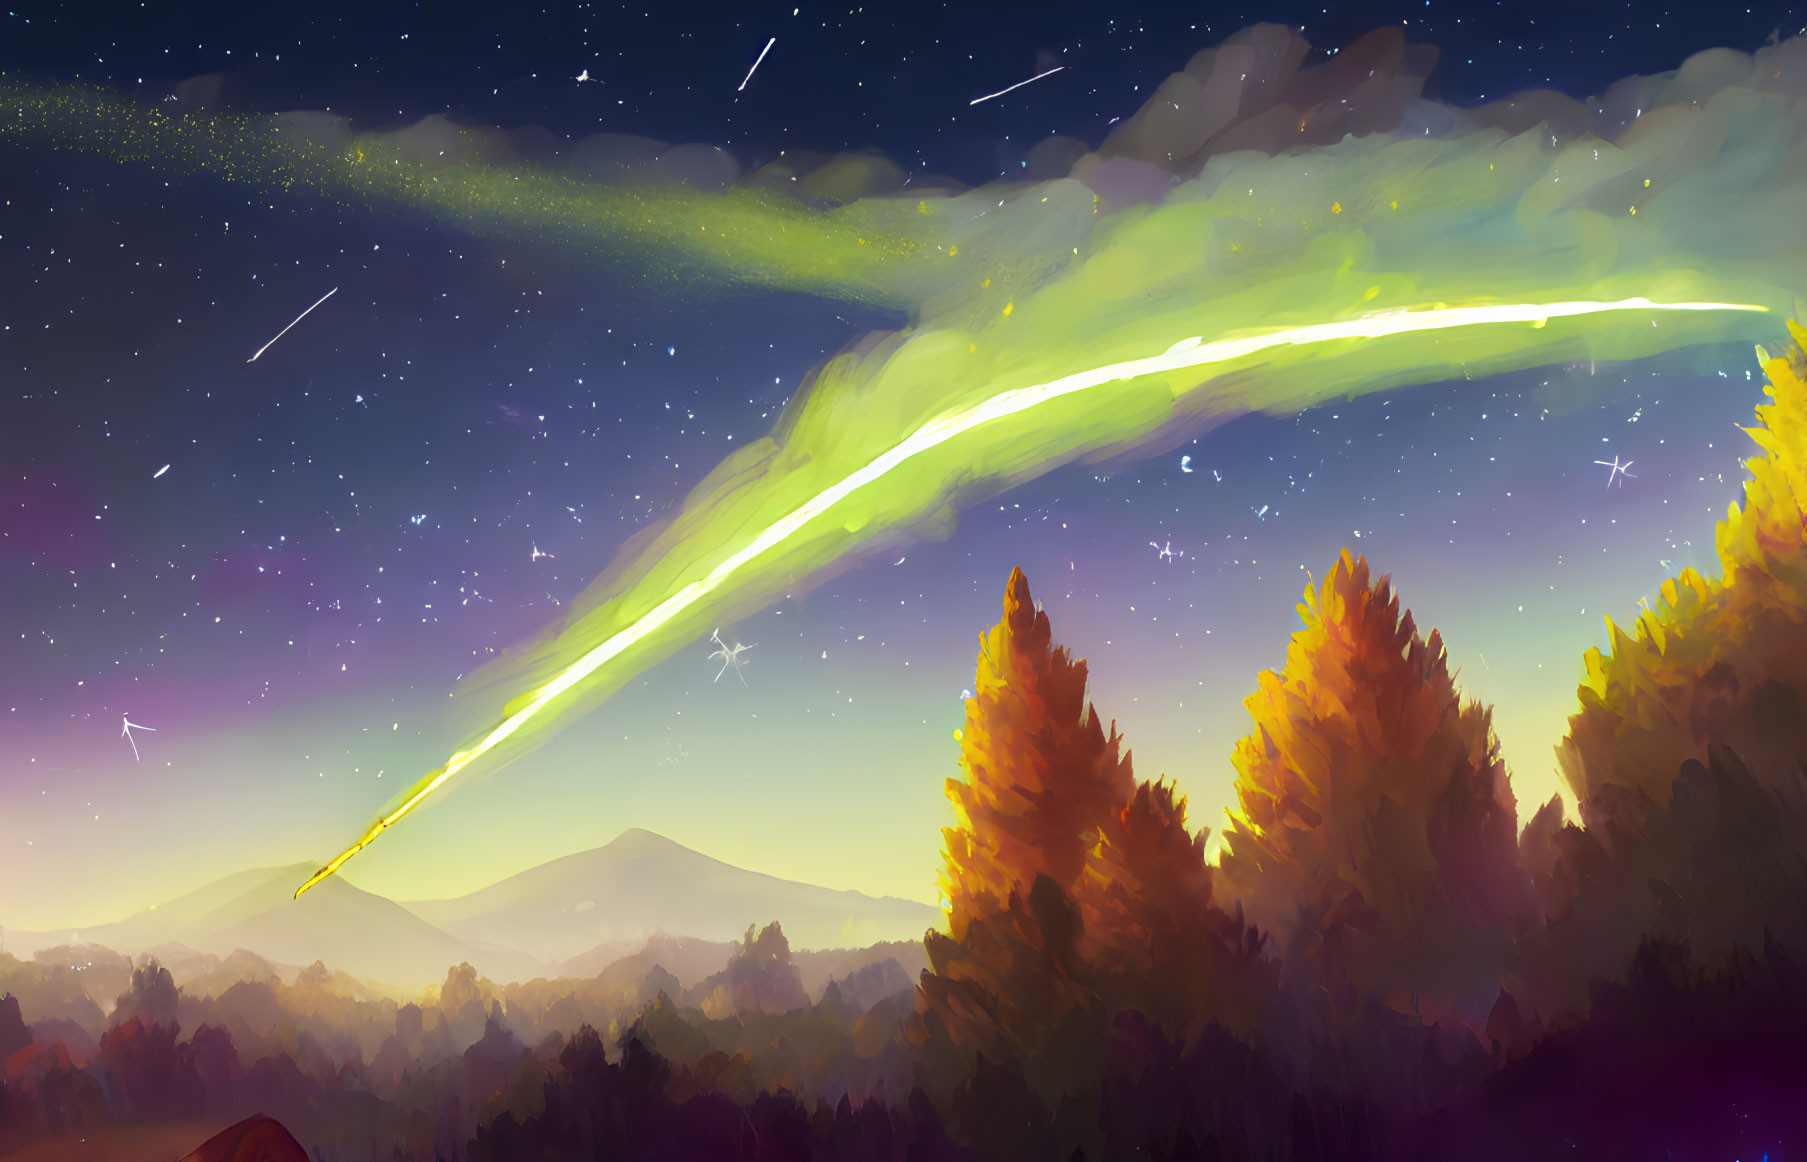 Starry Night Sky with Green Comet over Autumn Forest